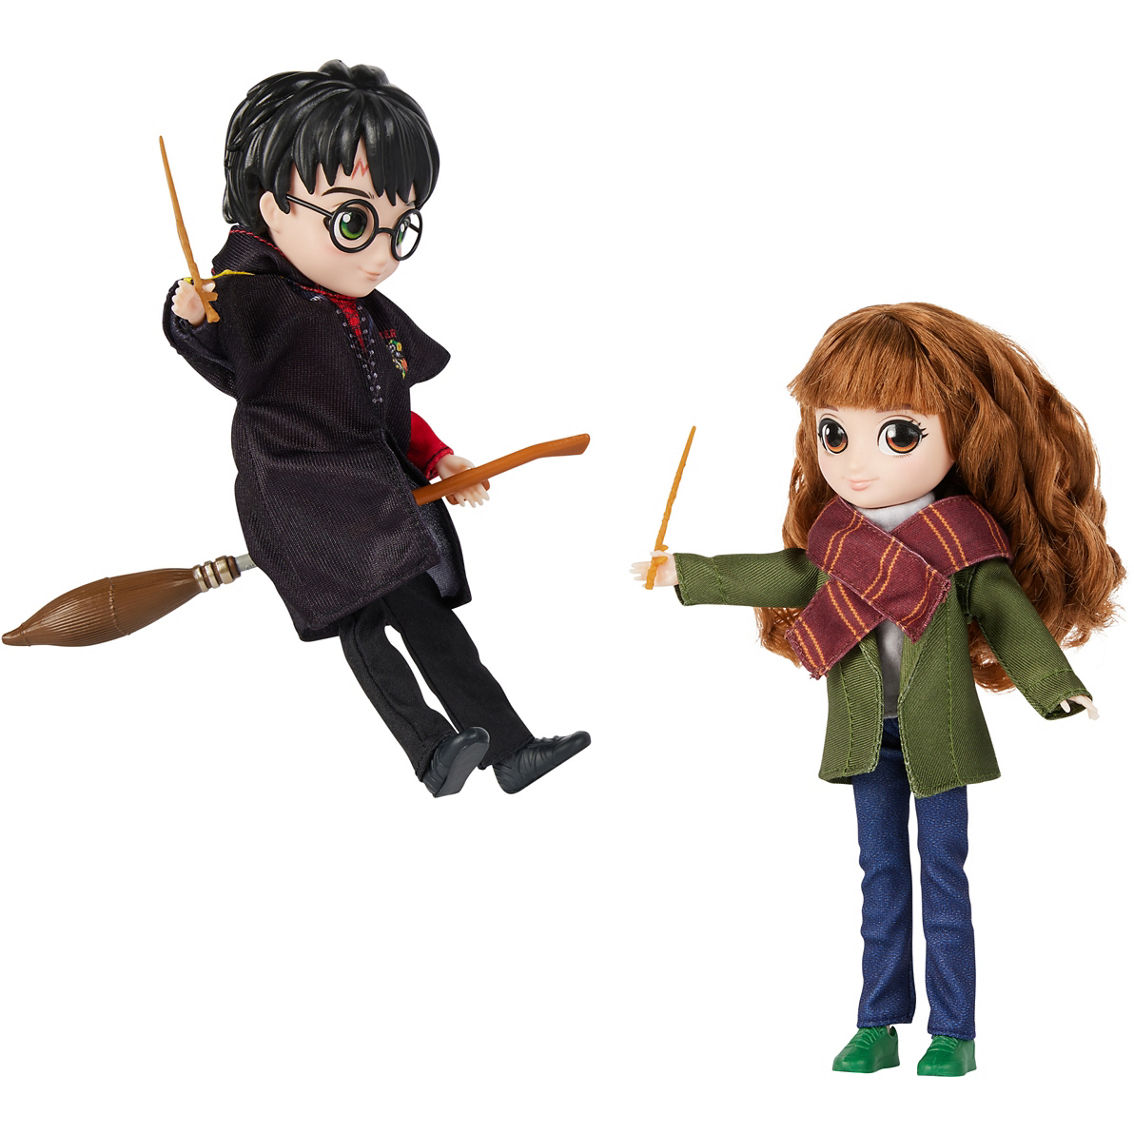 Wizarding World Harry & Hermione Triwizard Tournament Gift Set - Image 2 of 3